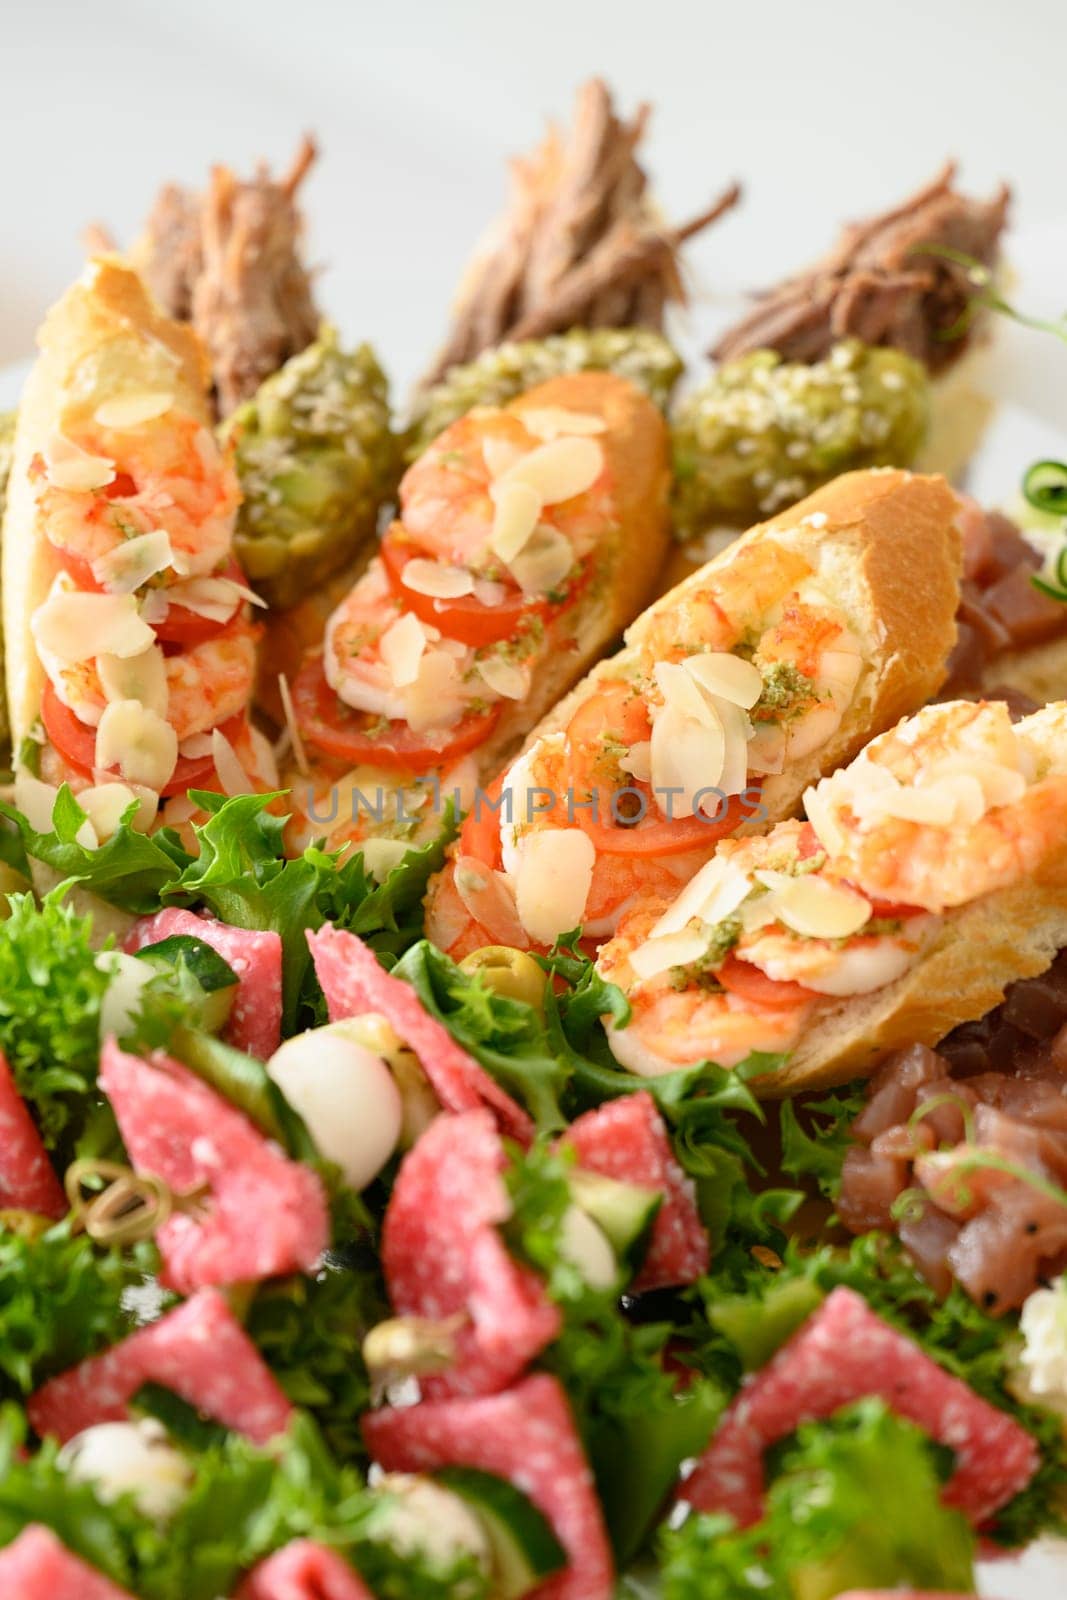 Appetizer with lettuce leaves and canapes with tomato and sausage, an appetizing light snack.